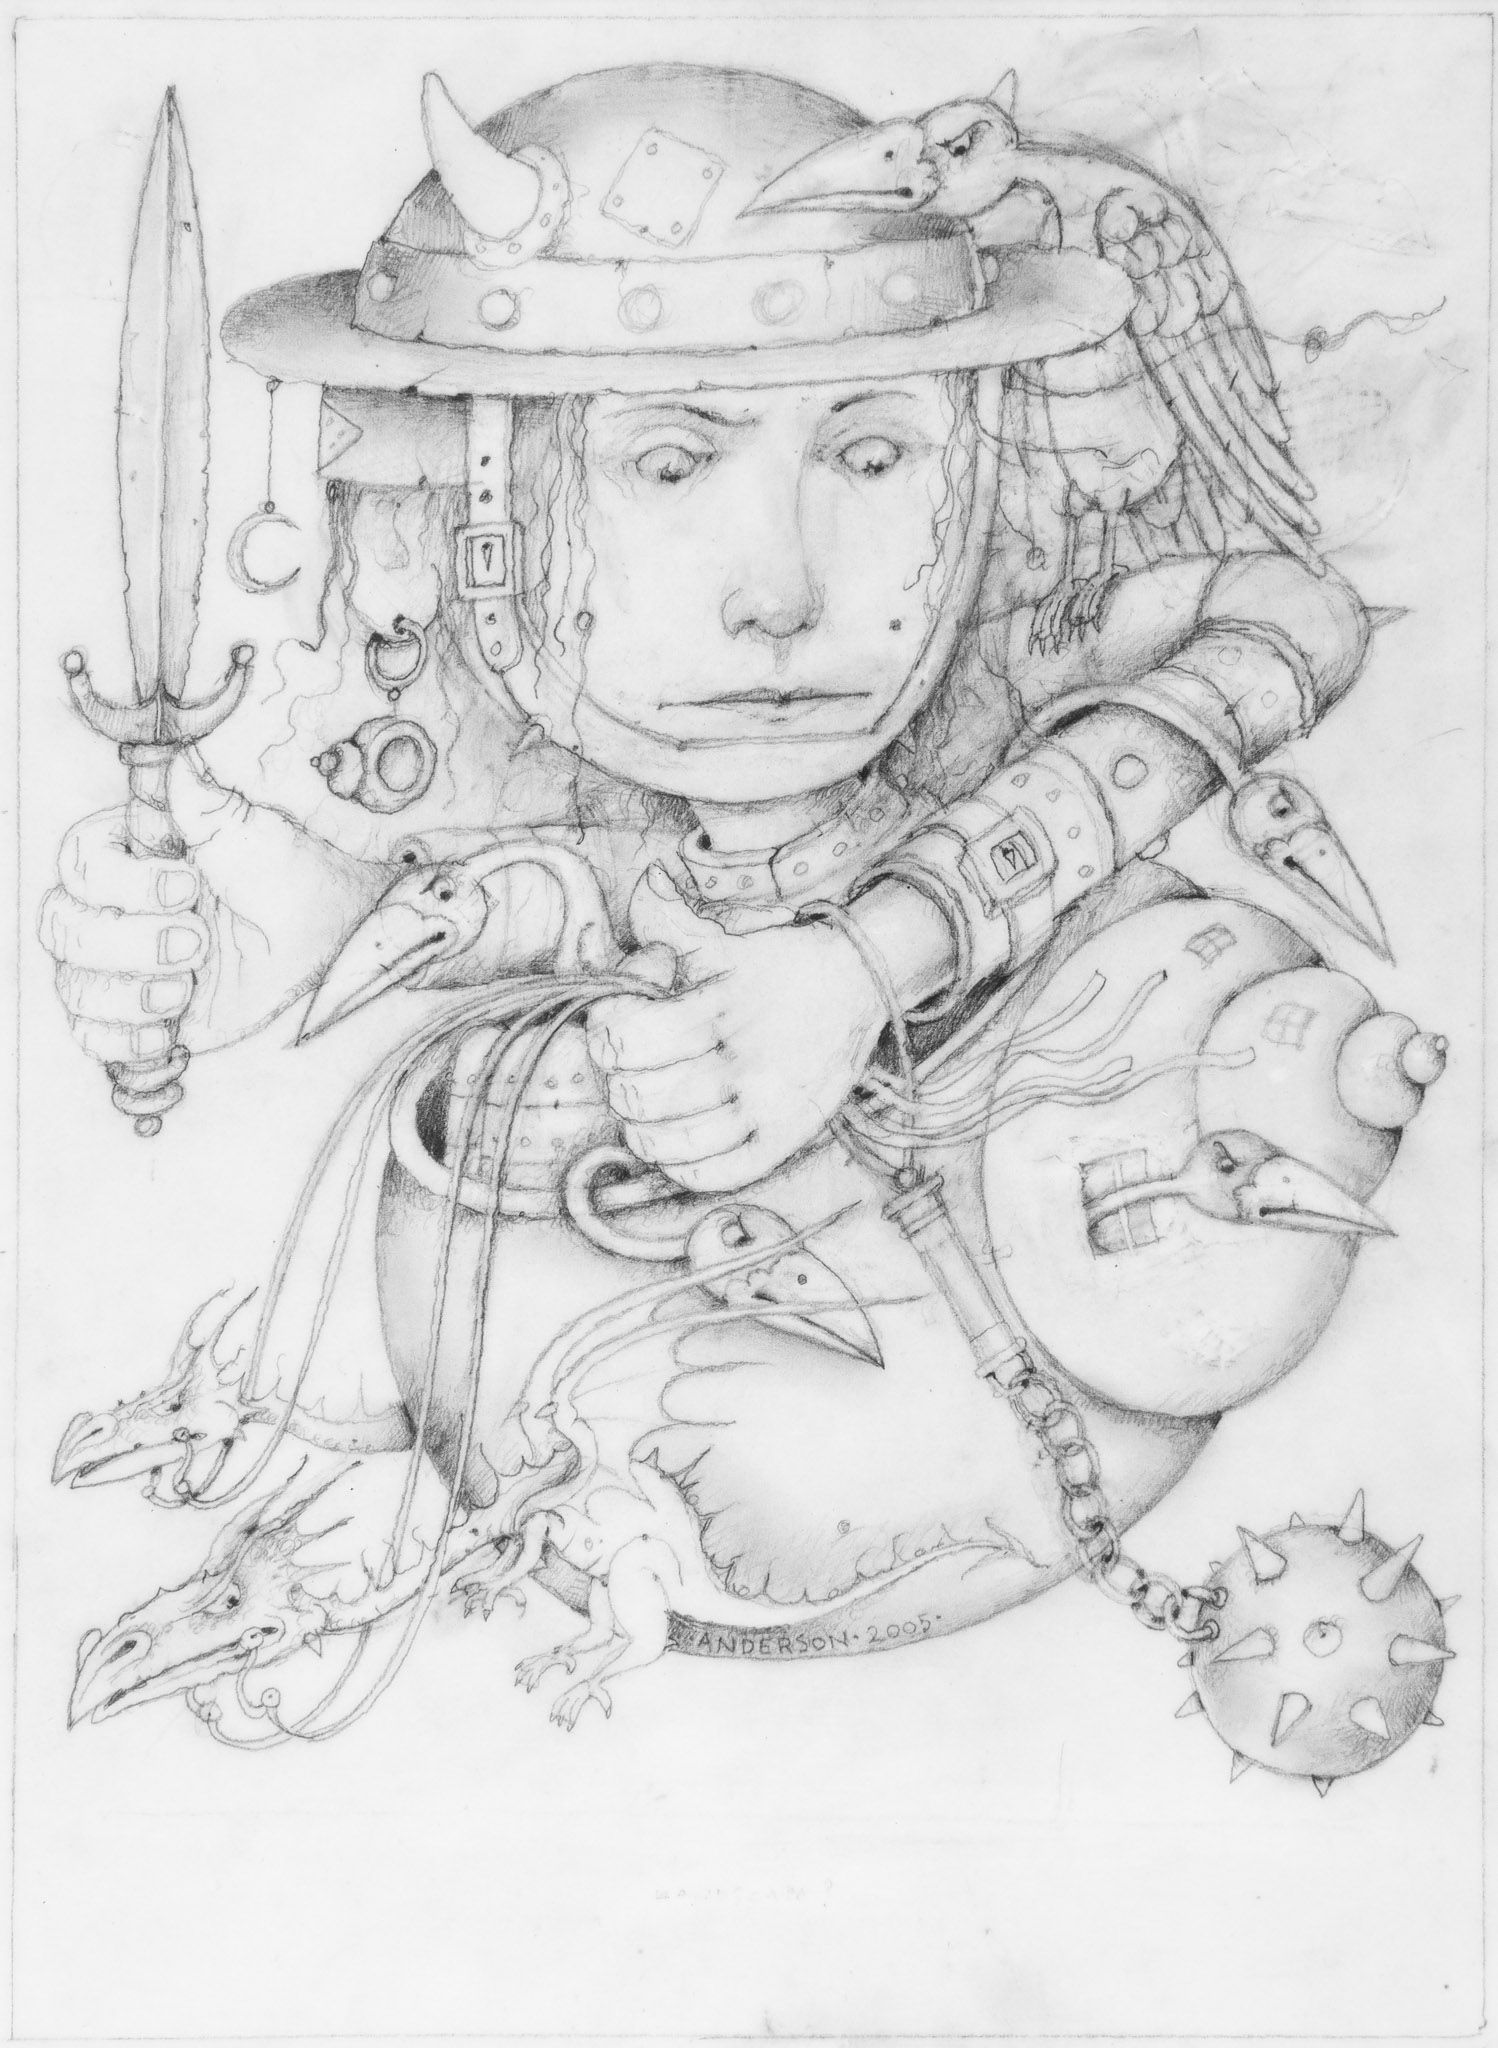 Anderson (Wayne) - Female Warrior, preliminary pencil drawing depicting an armed woman in spherical